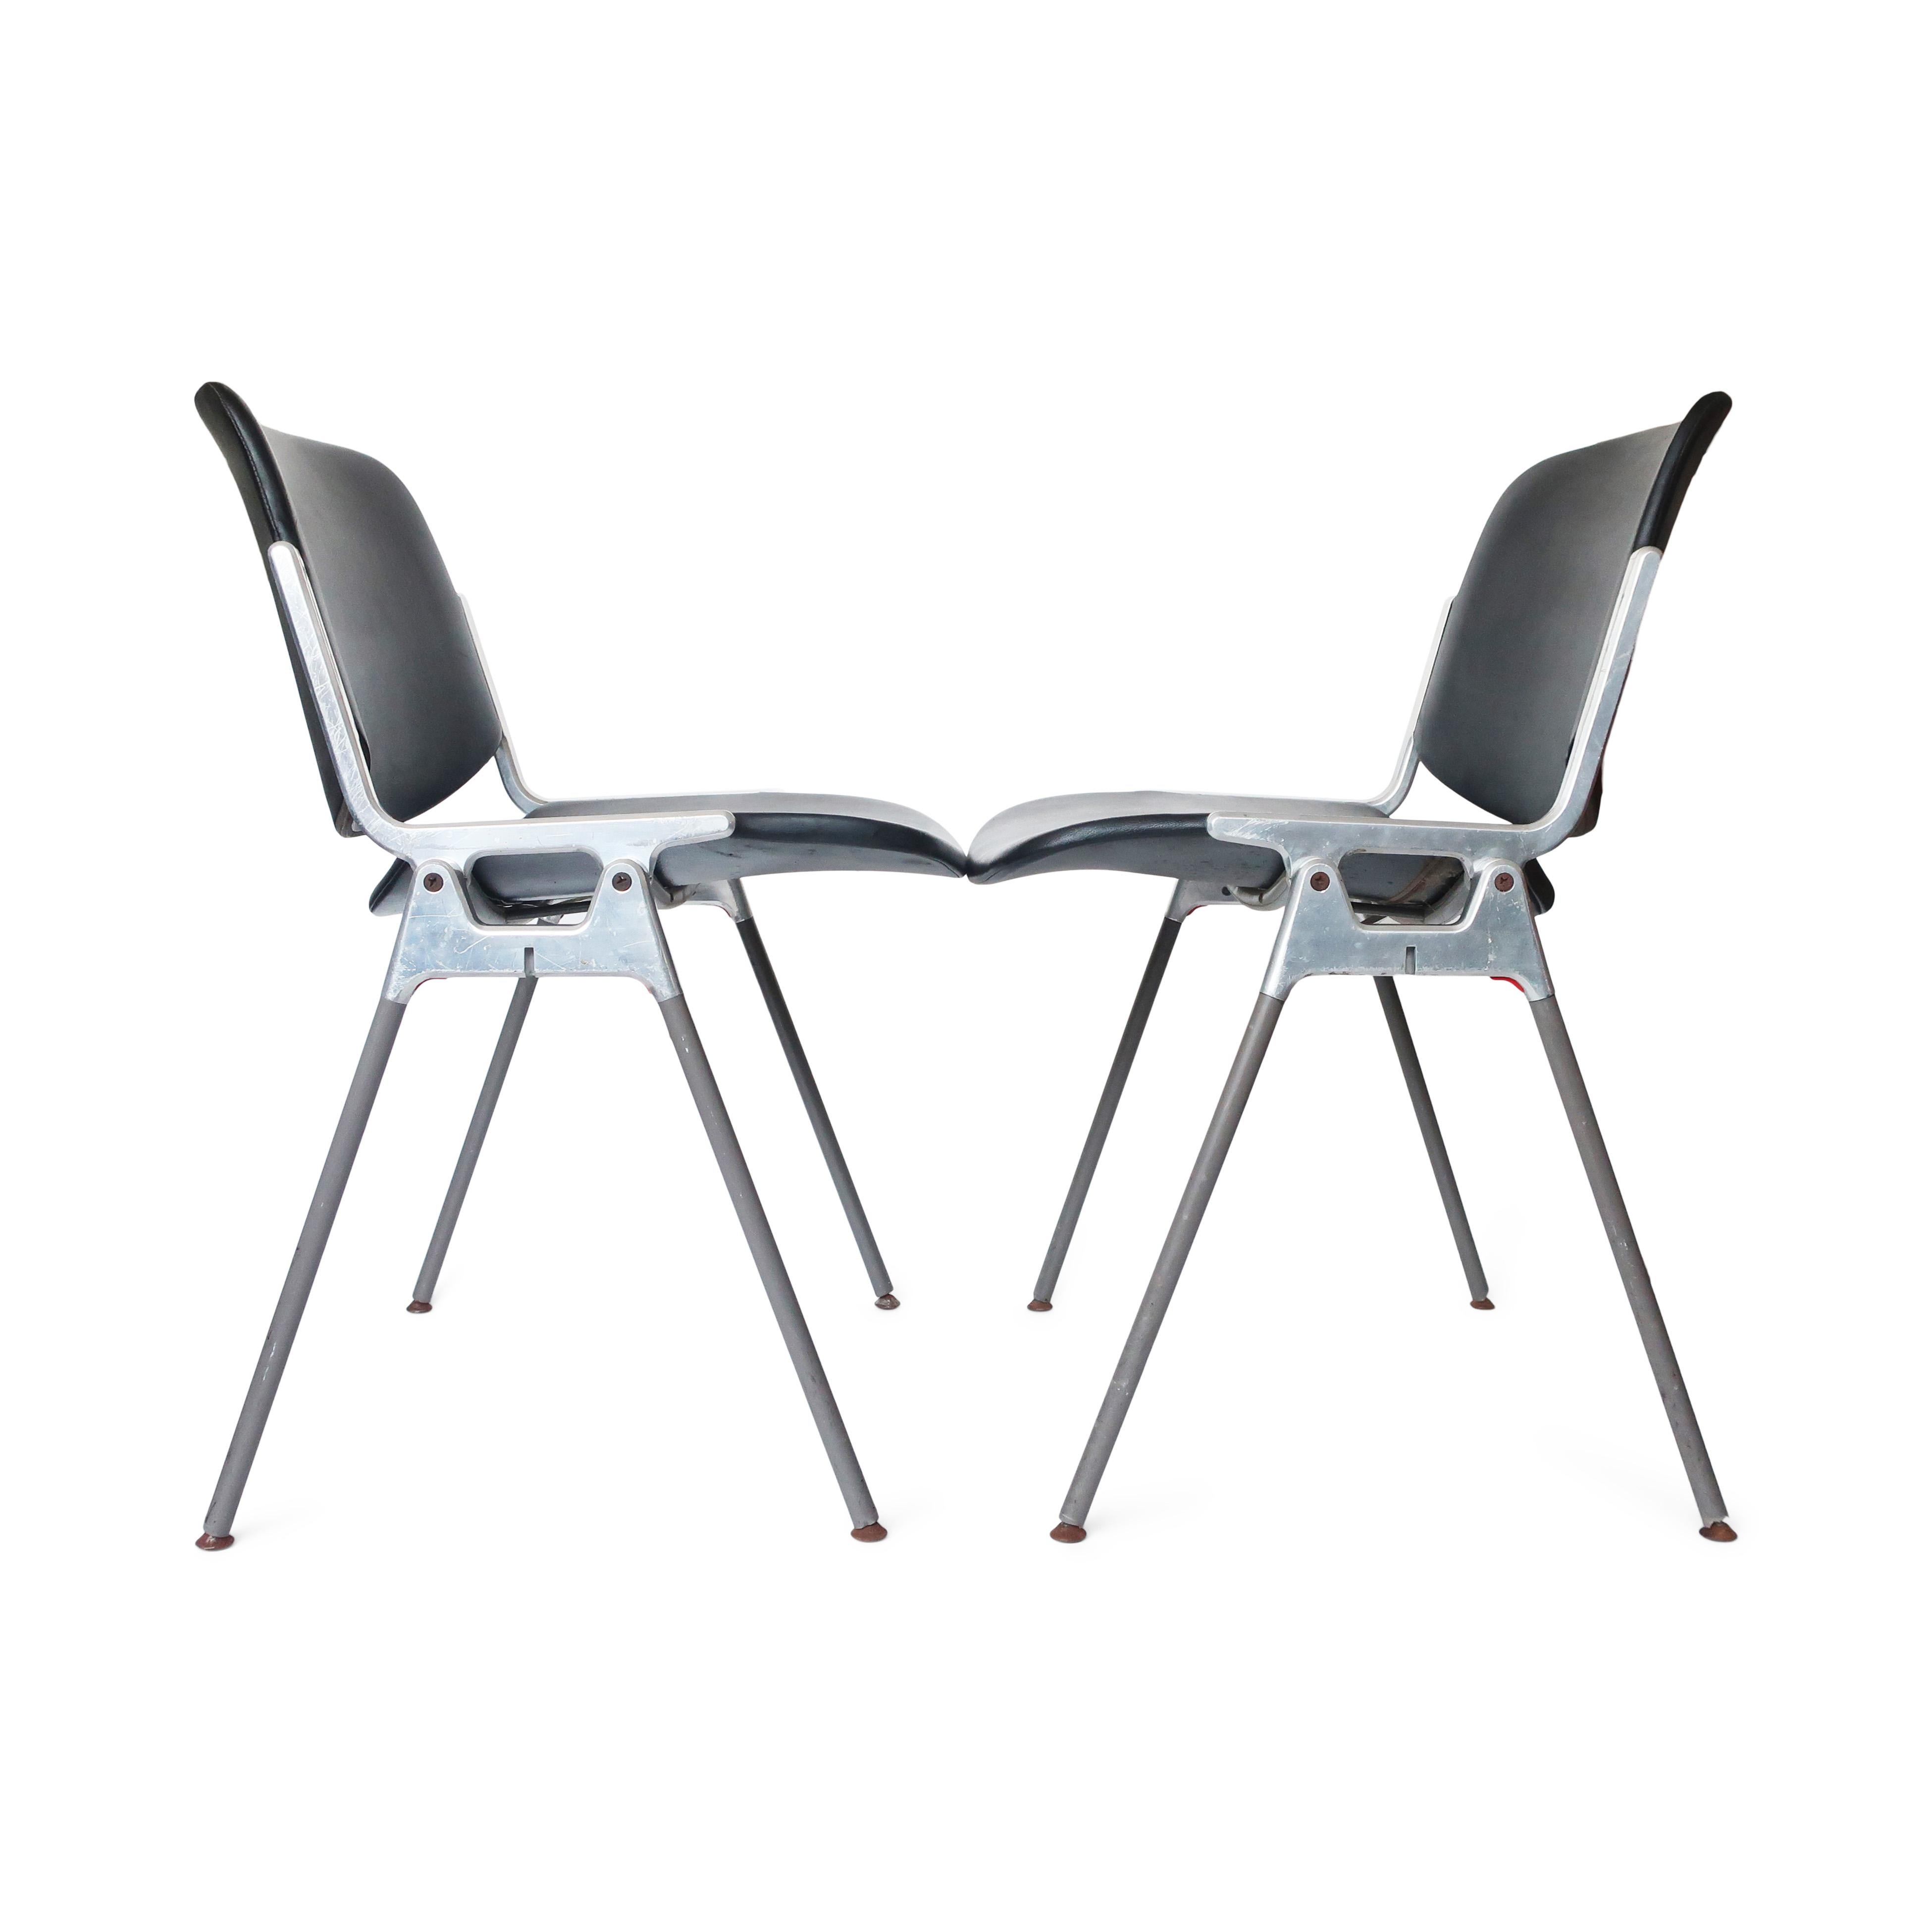 A pair of Italian Modern DSC 106 chairs designed by Giancarlo Piretti for Castelli. The sleek modernist design utilizes molded seats and backs upholstered in dark gray vinyl on a polished aluminum frame with angled grey painted legs. Super